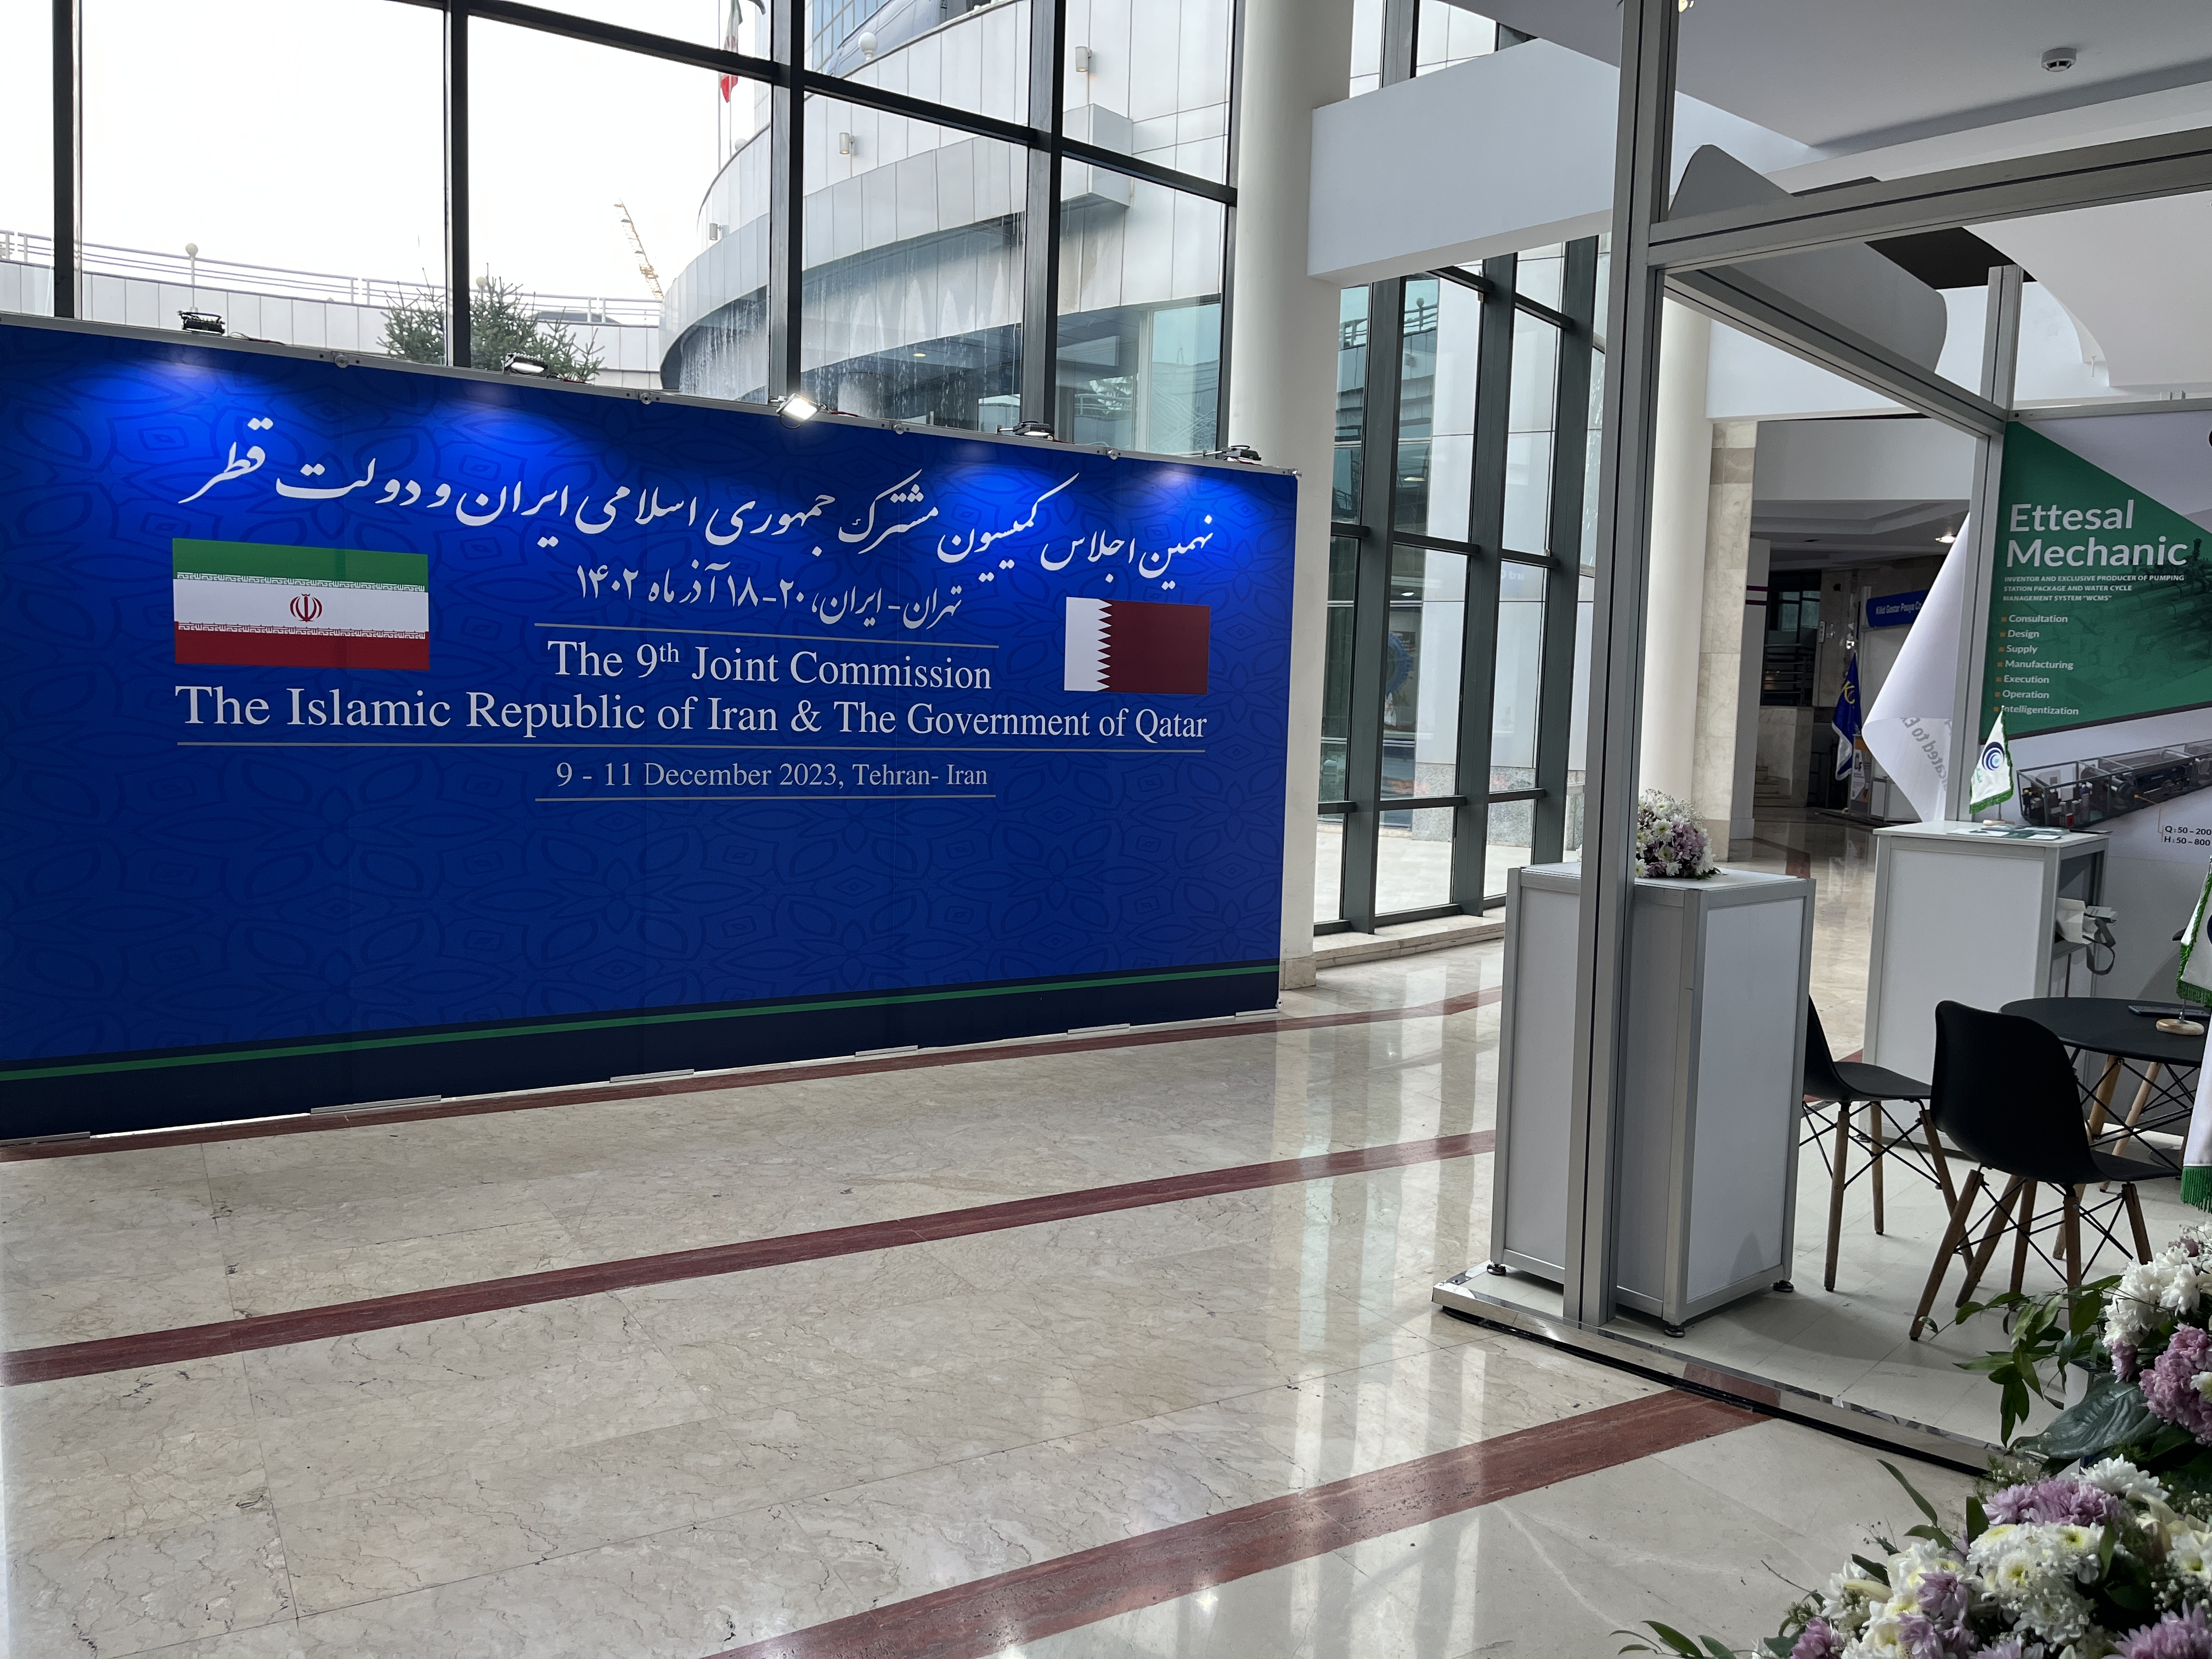 Participation in the exhibition held during the ninth meeting of the Joint Commission between the Islamic Republic of Iran and Government of Qatar, which took place from December 18th to 20th, 1402